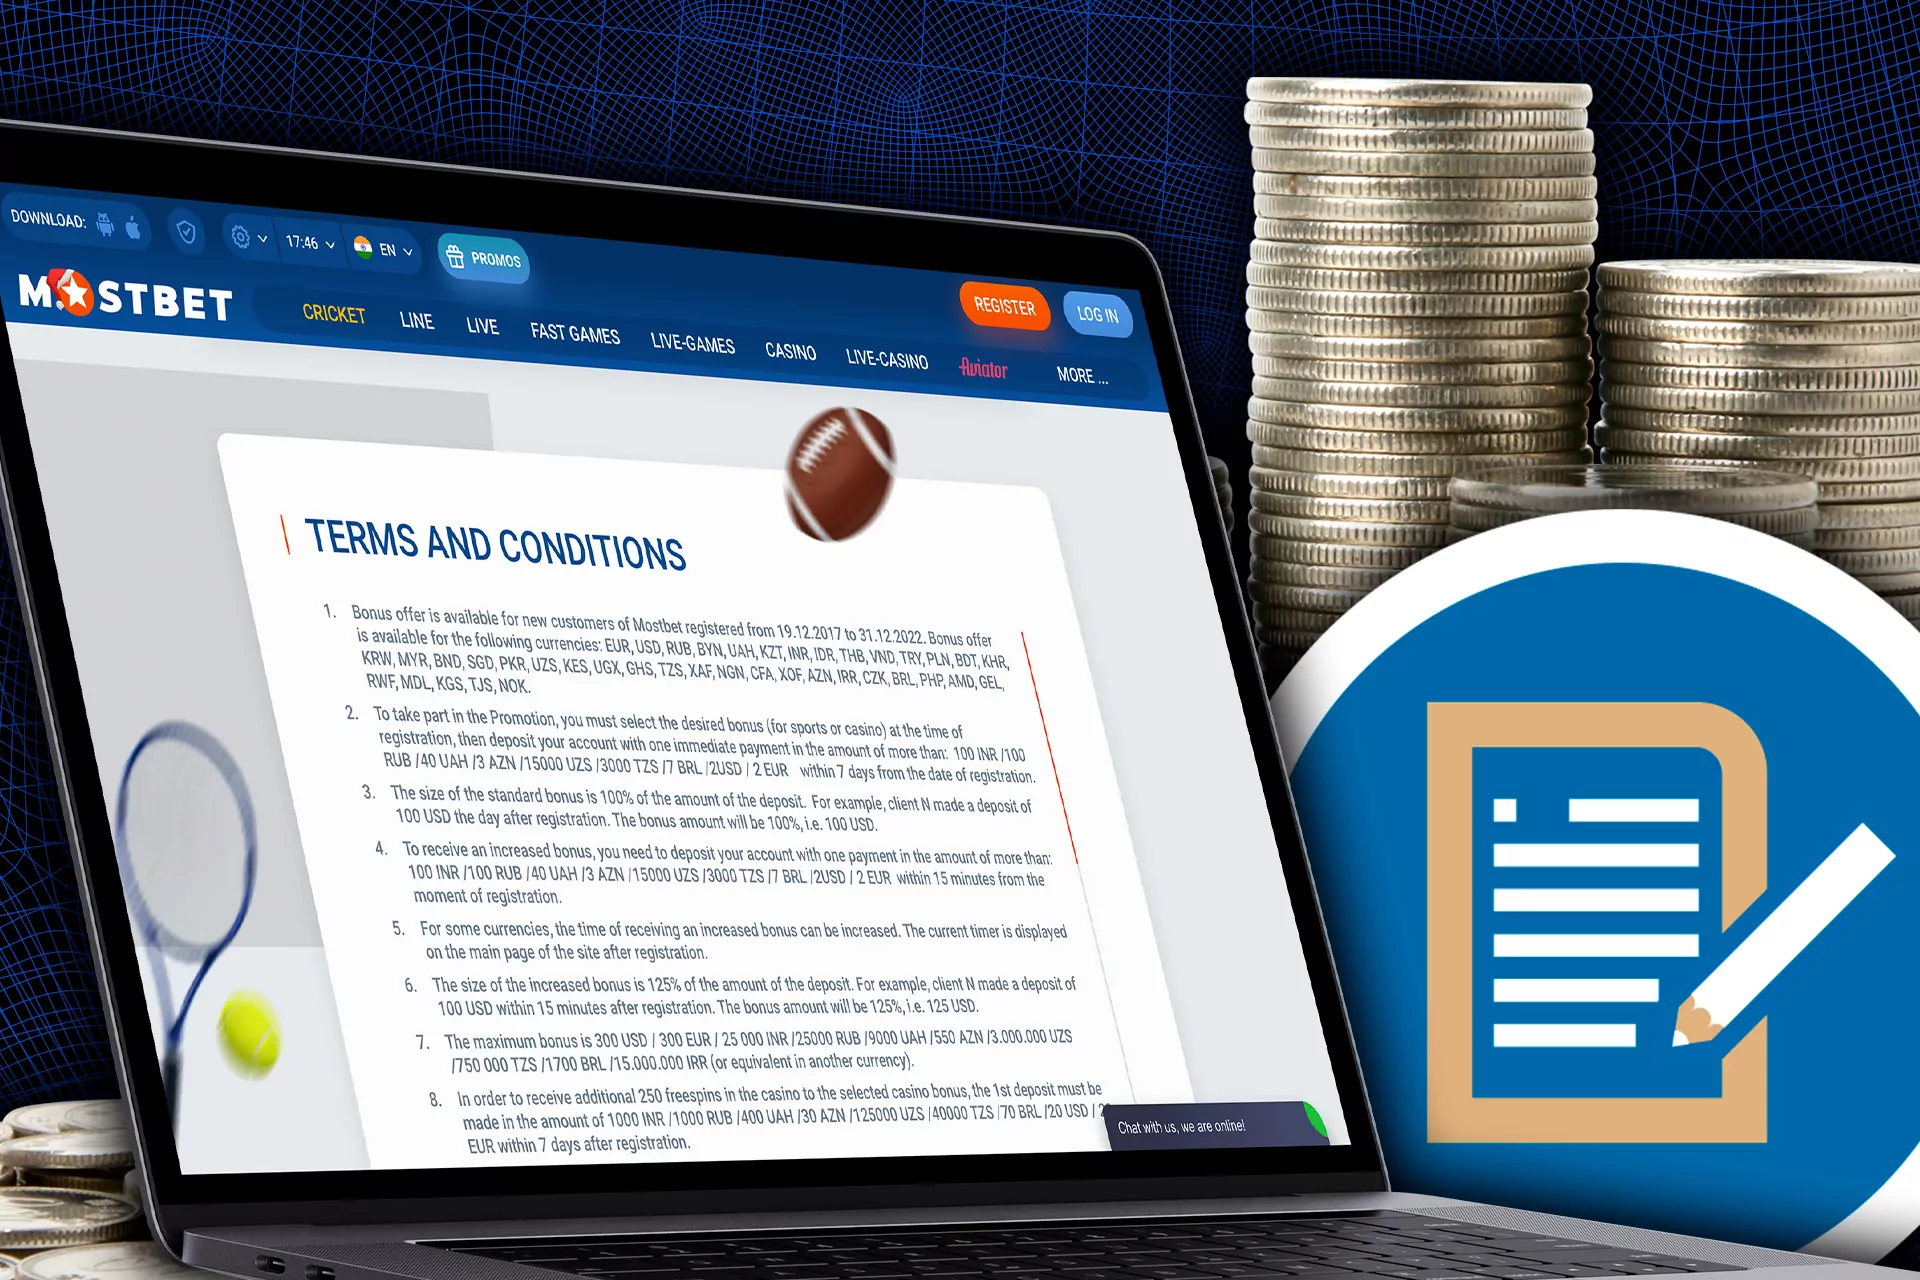 In the terms and conditions are located all the rules of Mostbet bonus programs.